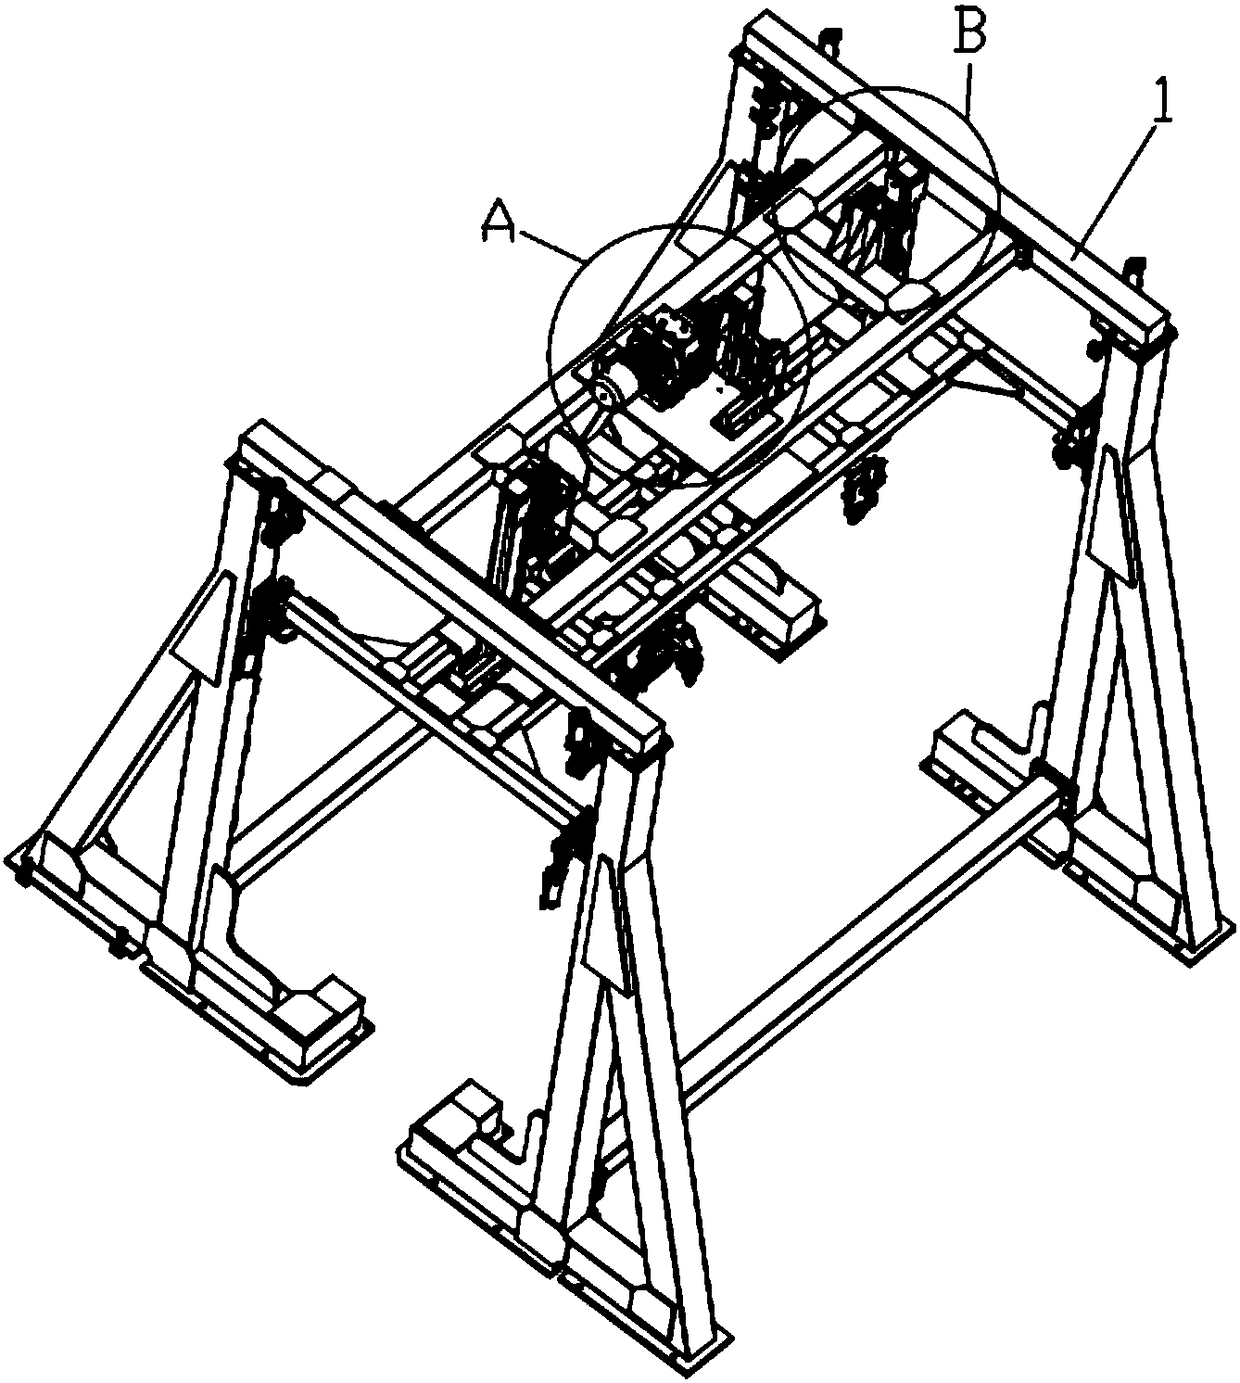 A lifting gantry structure